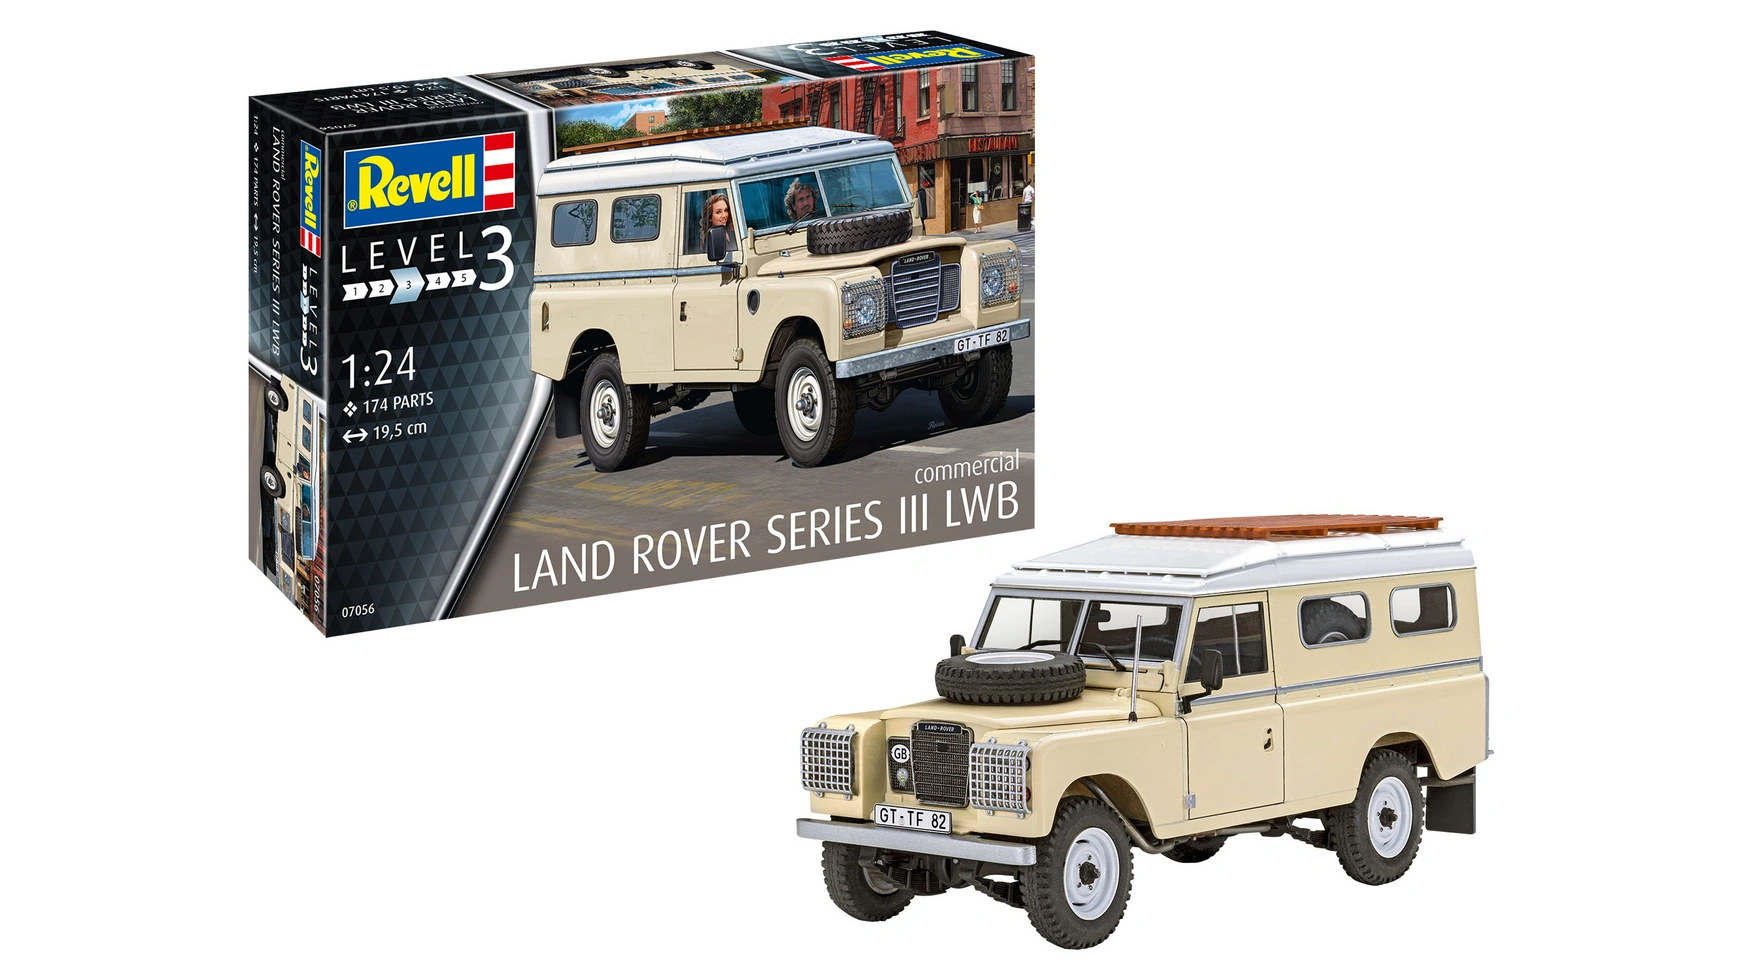 Revell Land Rover Series III LWB (коммерческий) 2021new 1：24 land rover range rover aluminum alloy model toys free shipping boy toys adult toys children s gifts best feel